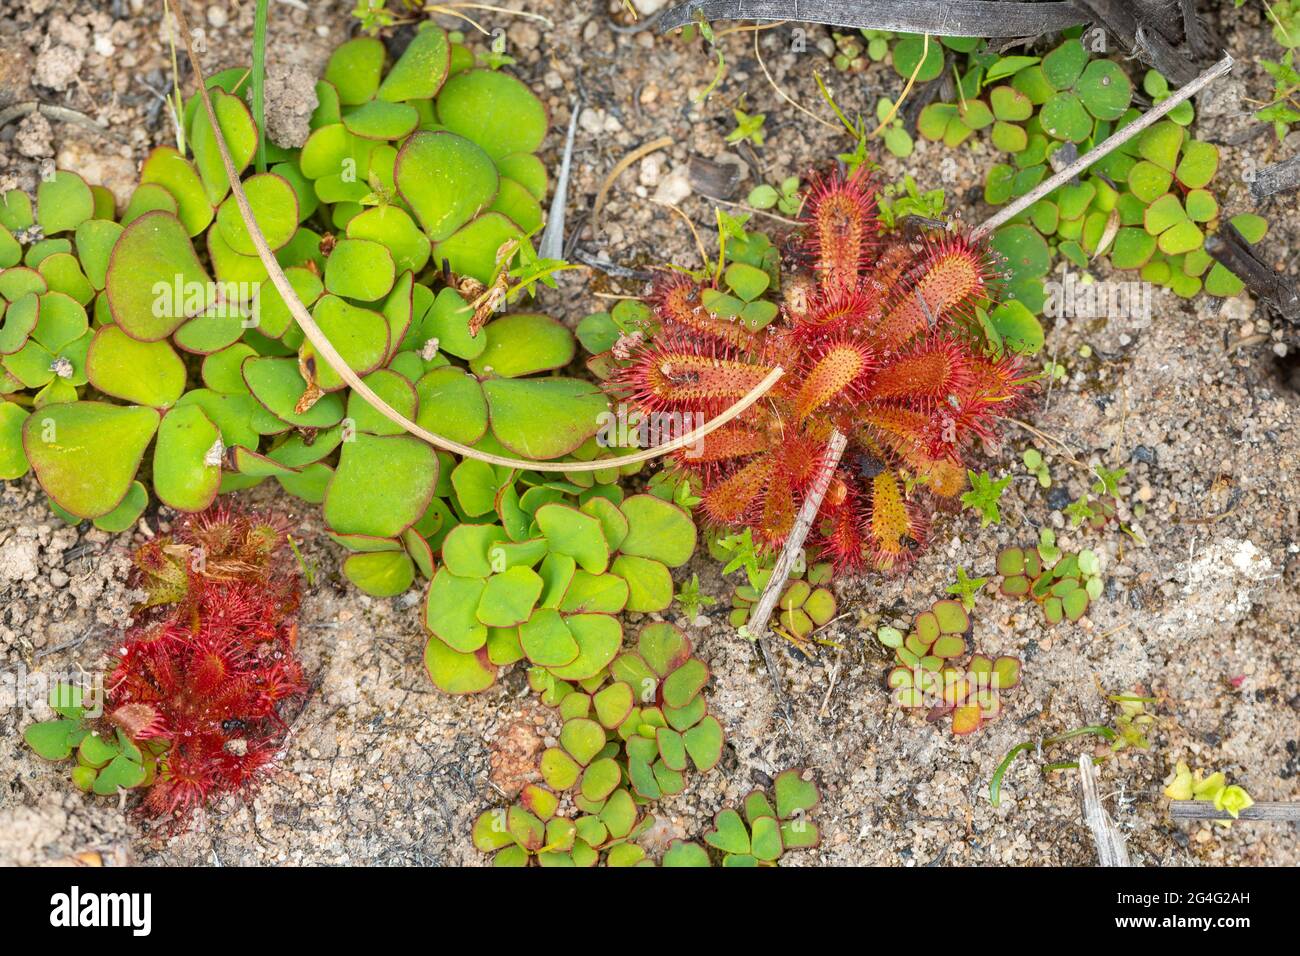 Drosera trinervia, a carnivorous plant from the Sundew family, in natural habitat close to VanRhynsdorp in the Western Cape of South Africa Stock Photo